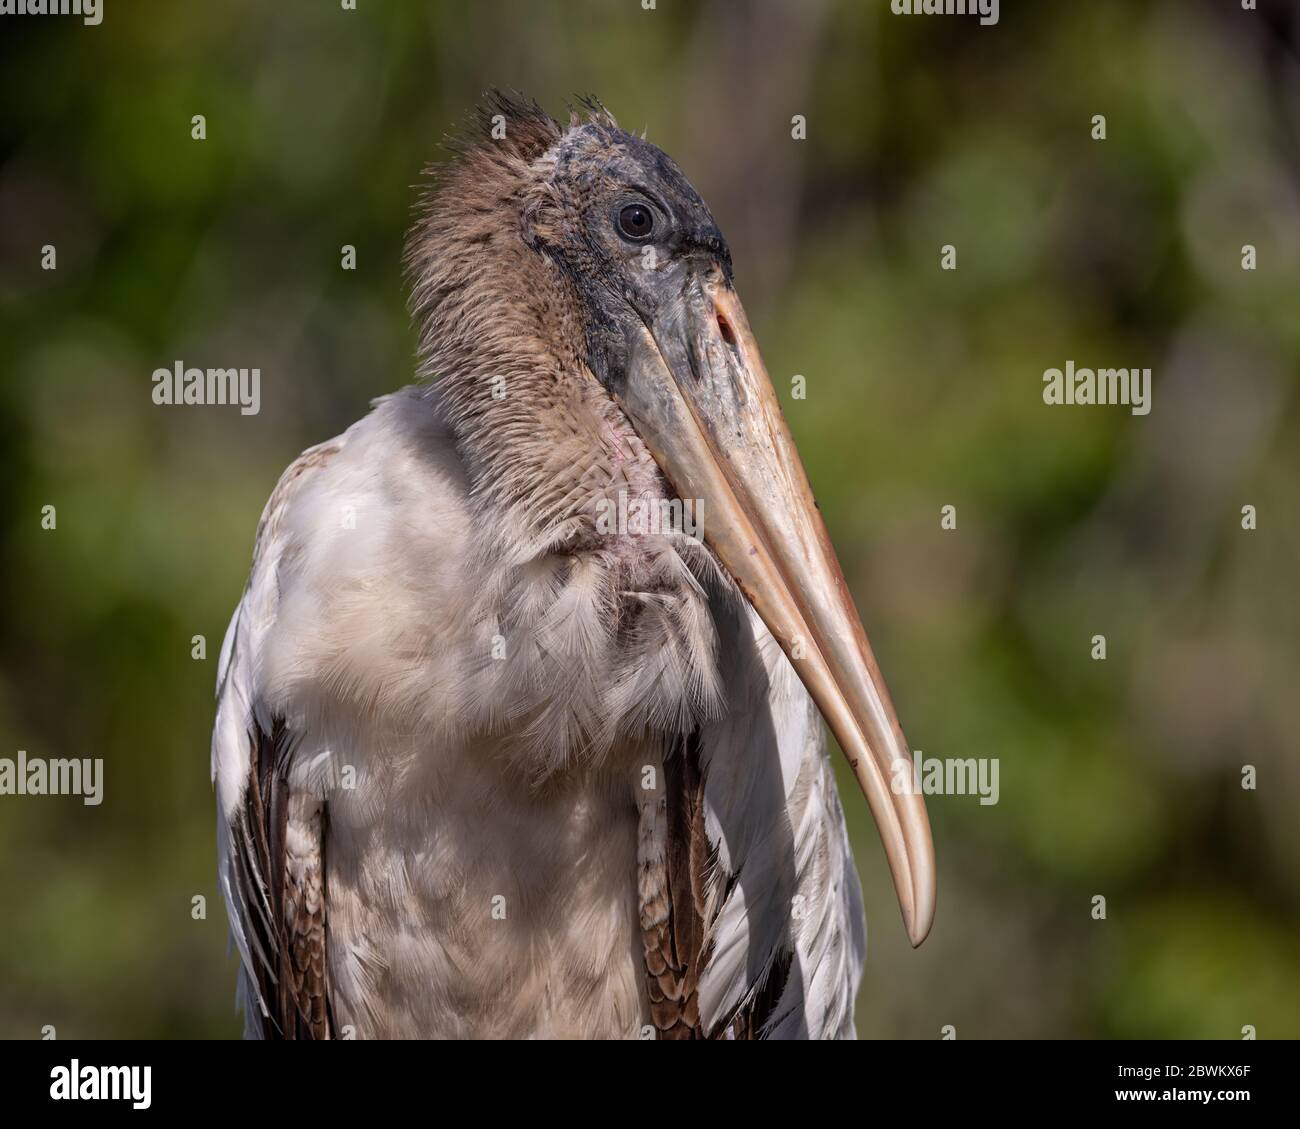 Profile View Portrait of a young immature Wood Stork in a swamp near a rookerie in Northern Florida Jacksonville area in March during nesting season Stock Photo